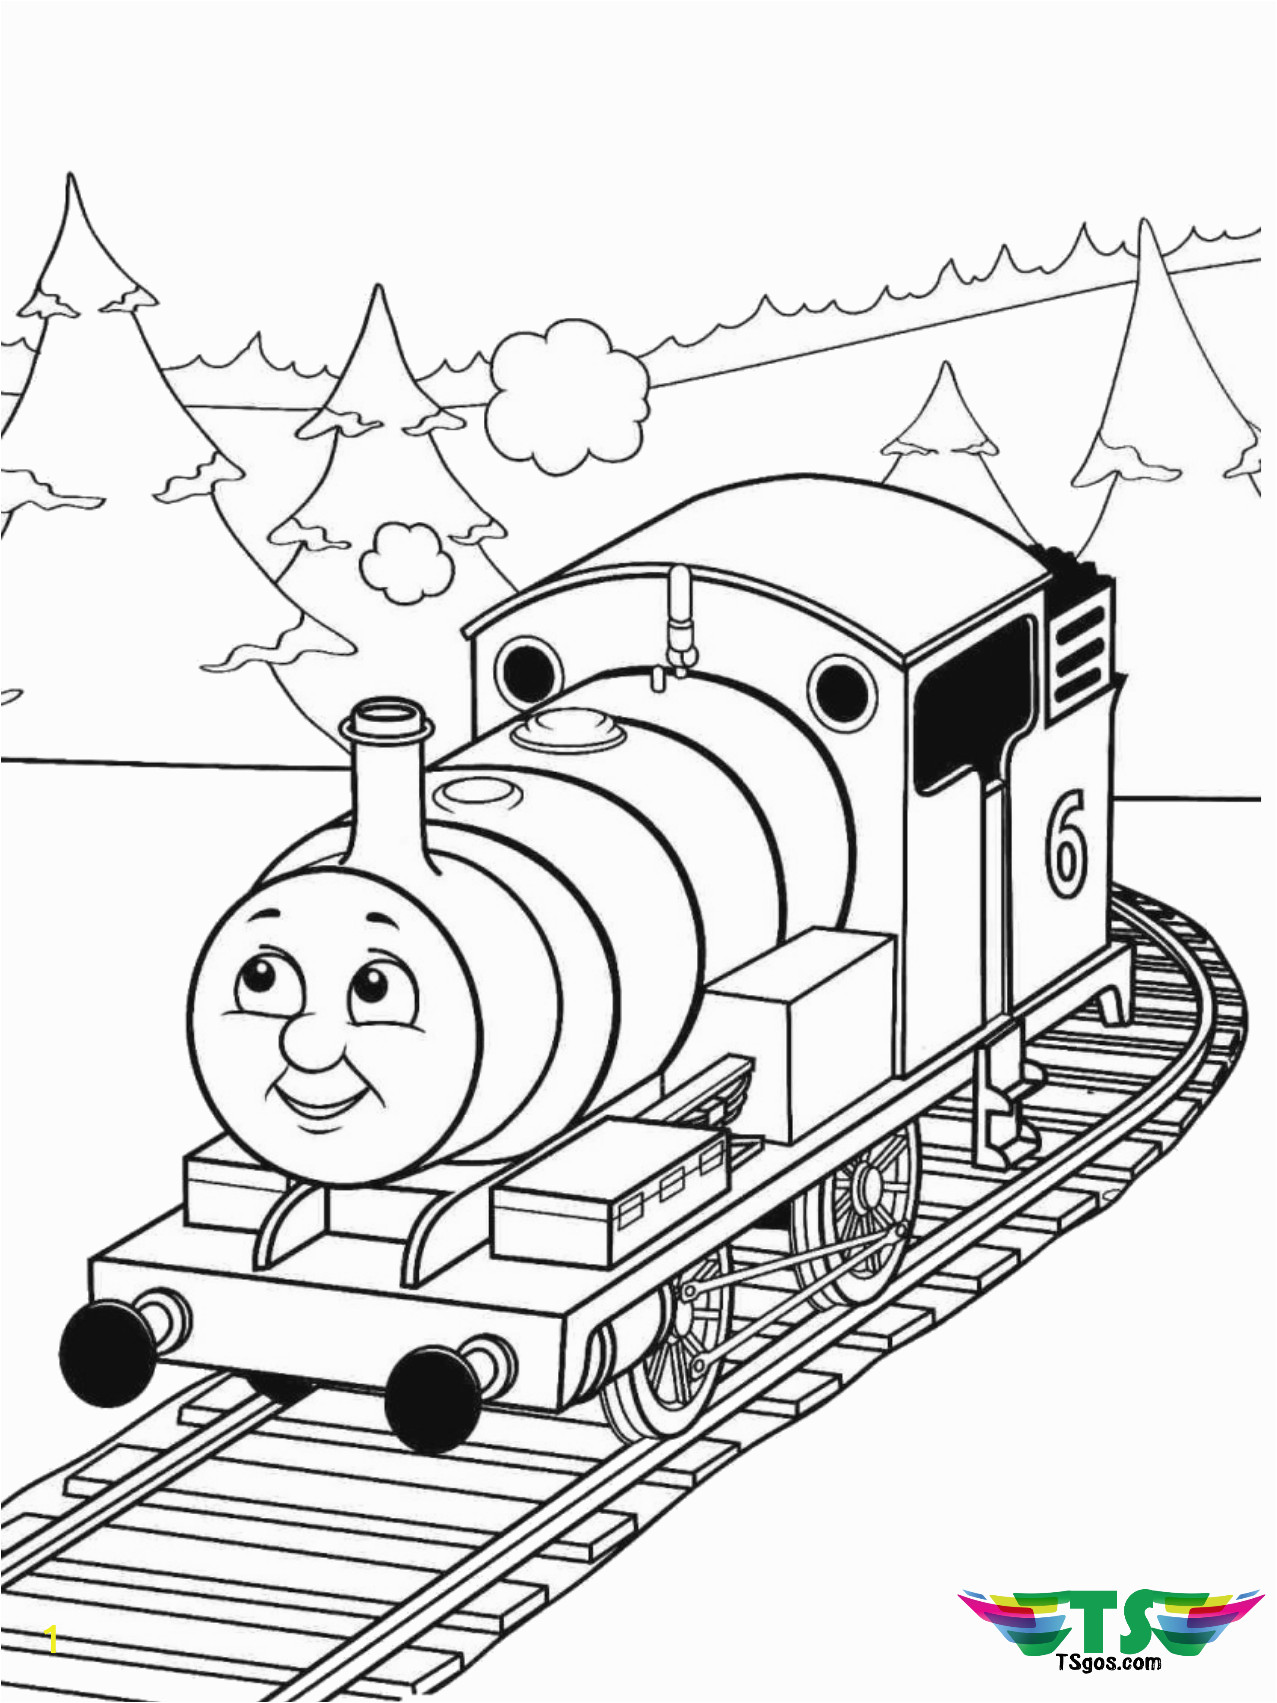 thomas the tank engine train coloring page